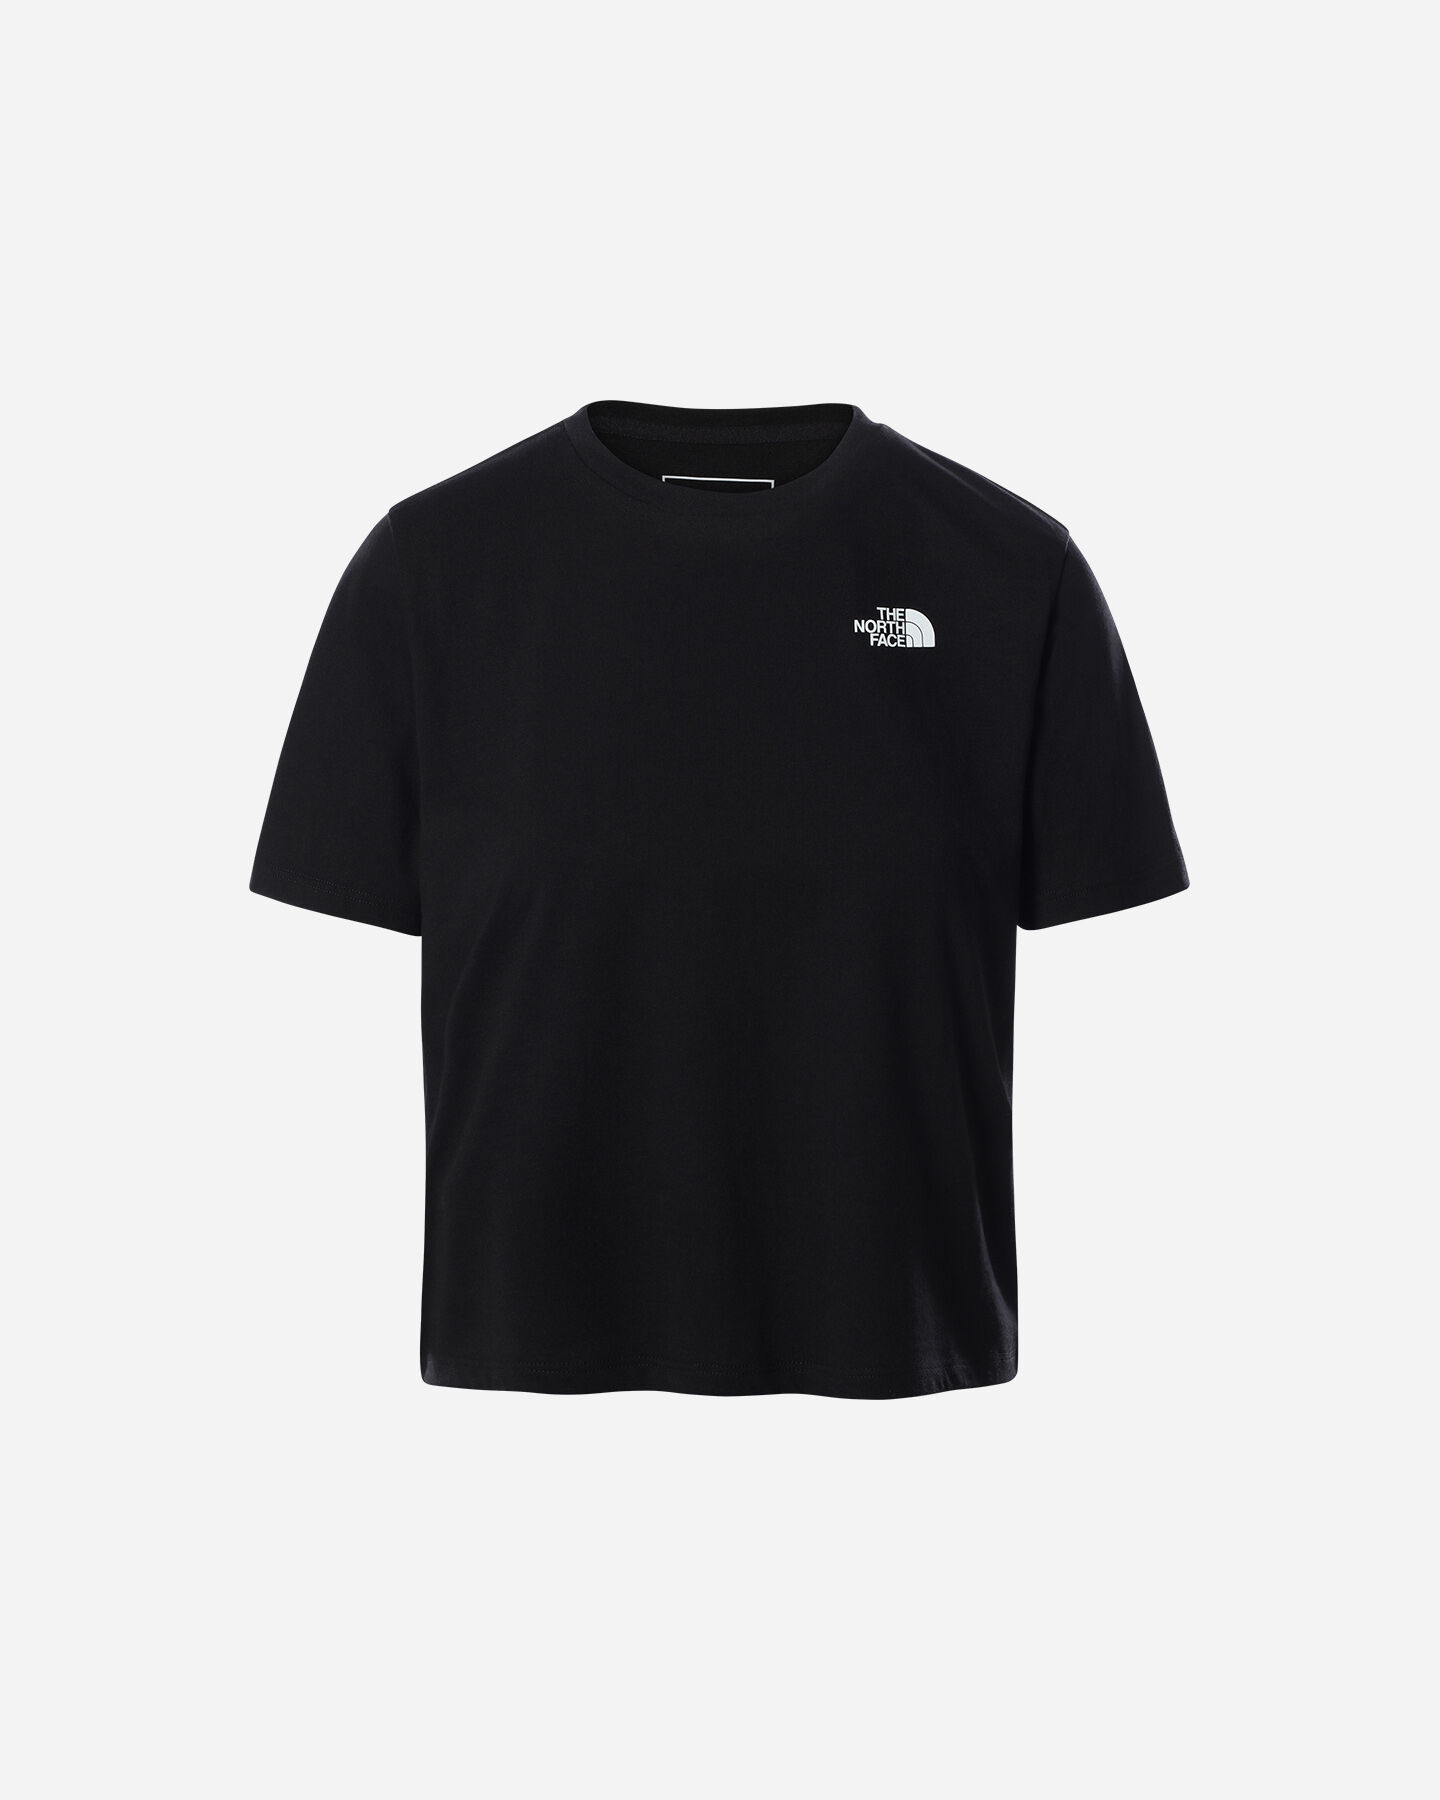  T-Shirt THE NORTH FACE CROP SMALL LOGO W S5347948|JK3|XS scatto 0